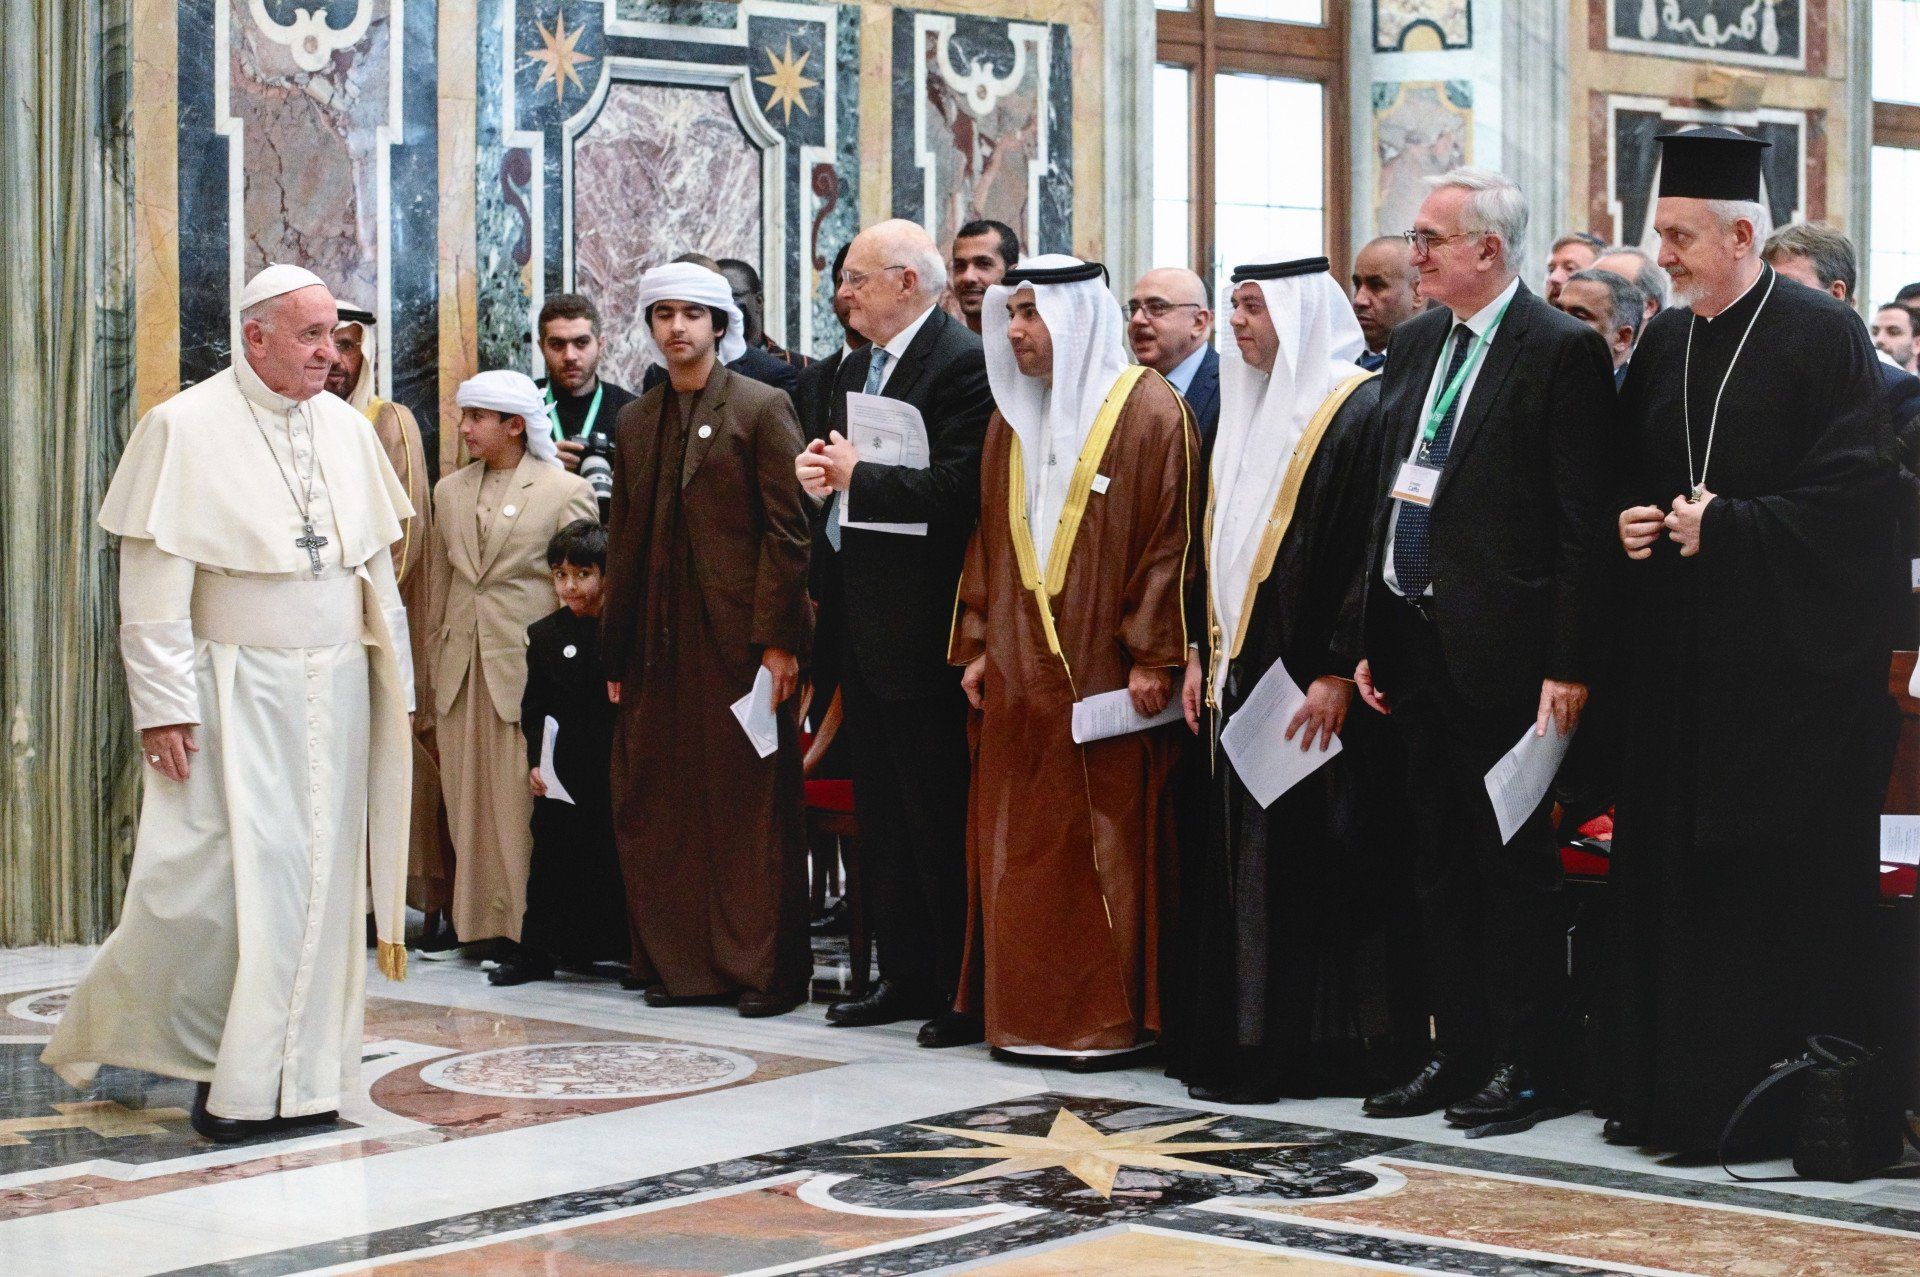 The pope walking down an isle in front of many men at Casina Pio IV